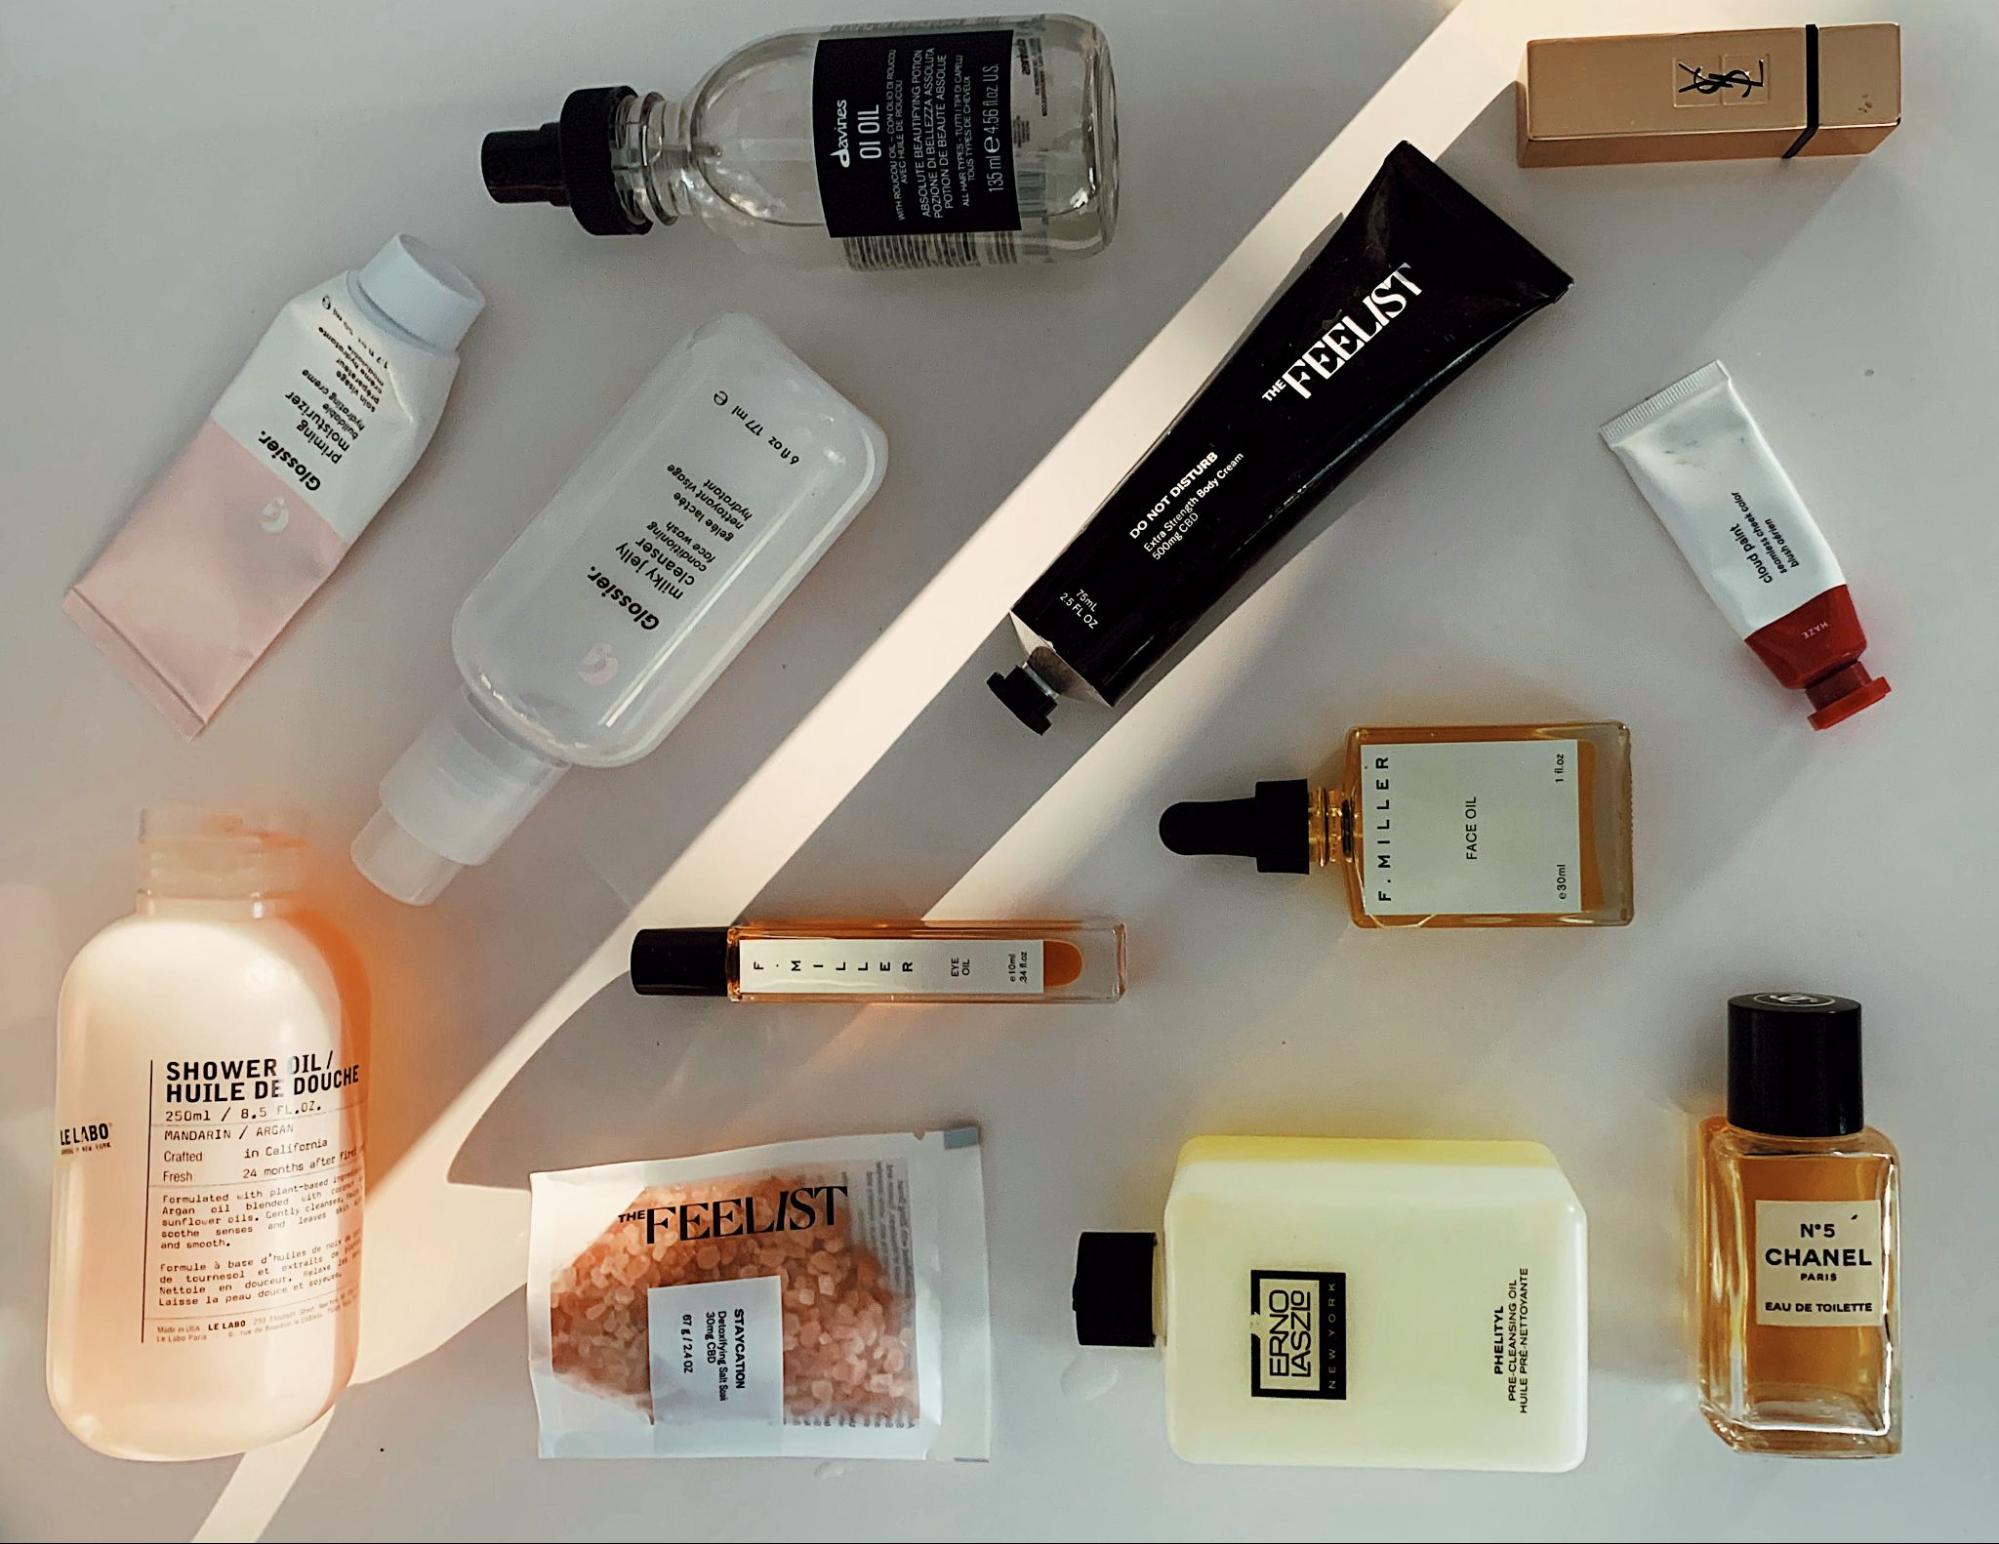 THE BEST ORDER TO APPLY SKIN CARE PRODUCTS